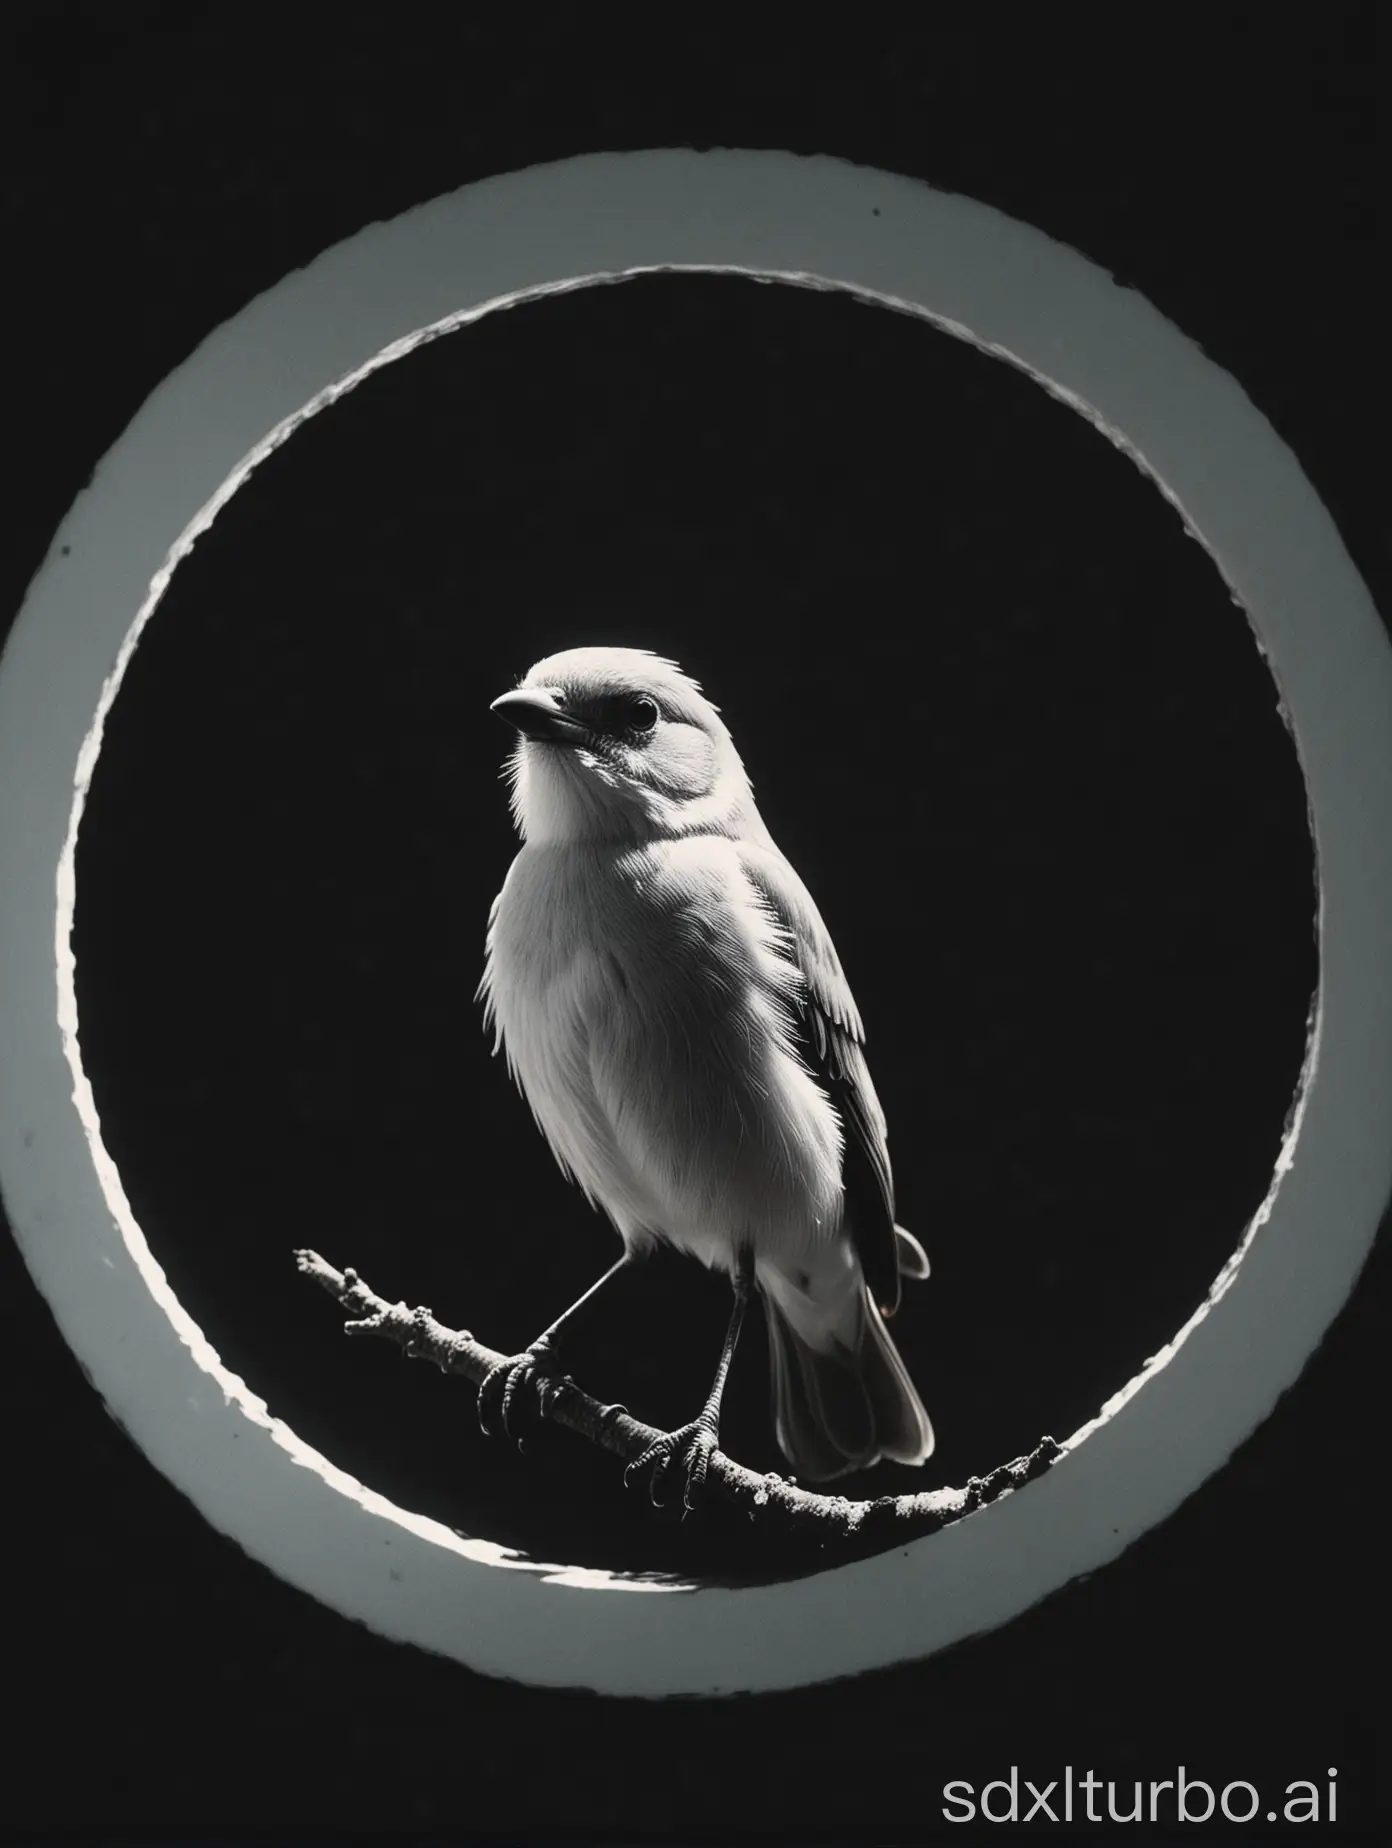 A photo of Bird, a white circle behind it is illuminated in the style of light from inside, black background, 90s aesthetic, film grain, color negative, suspense, nightshot photography